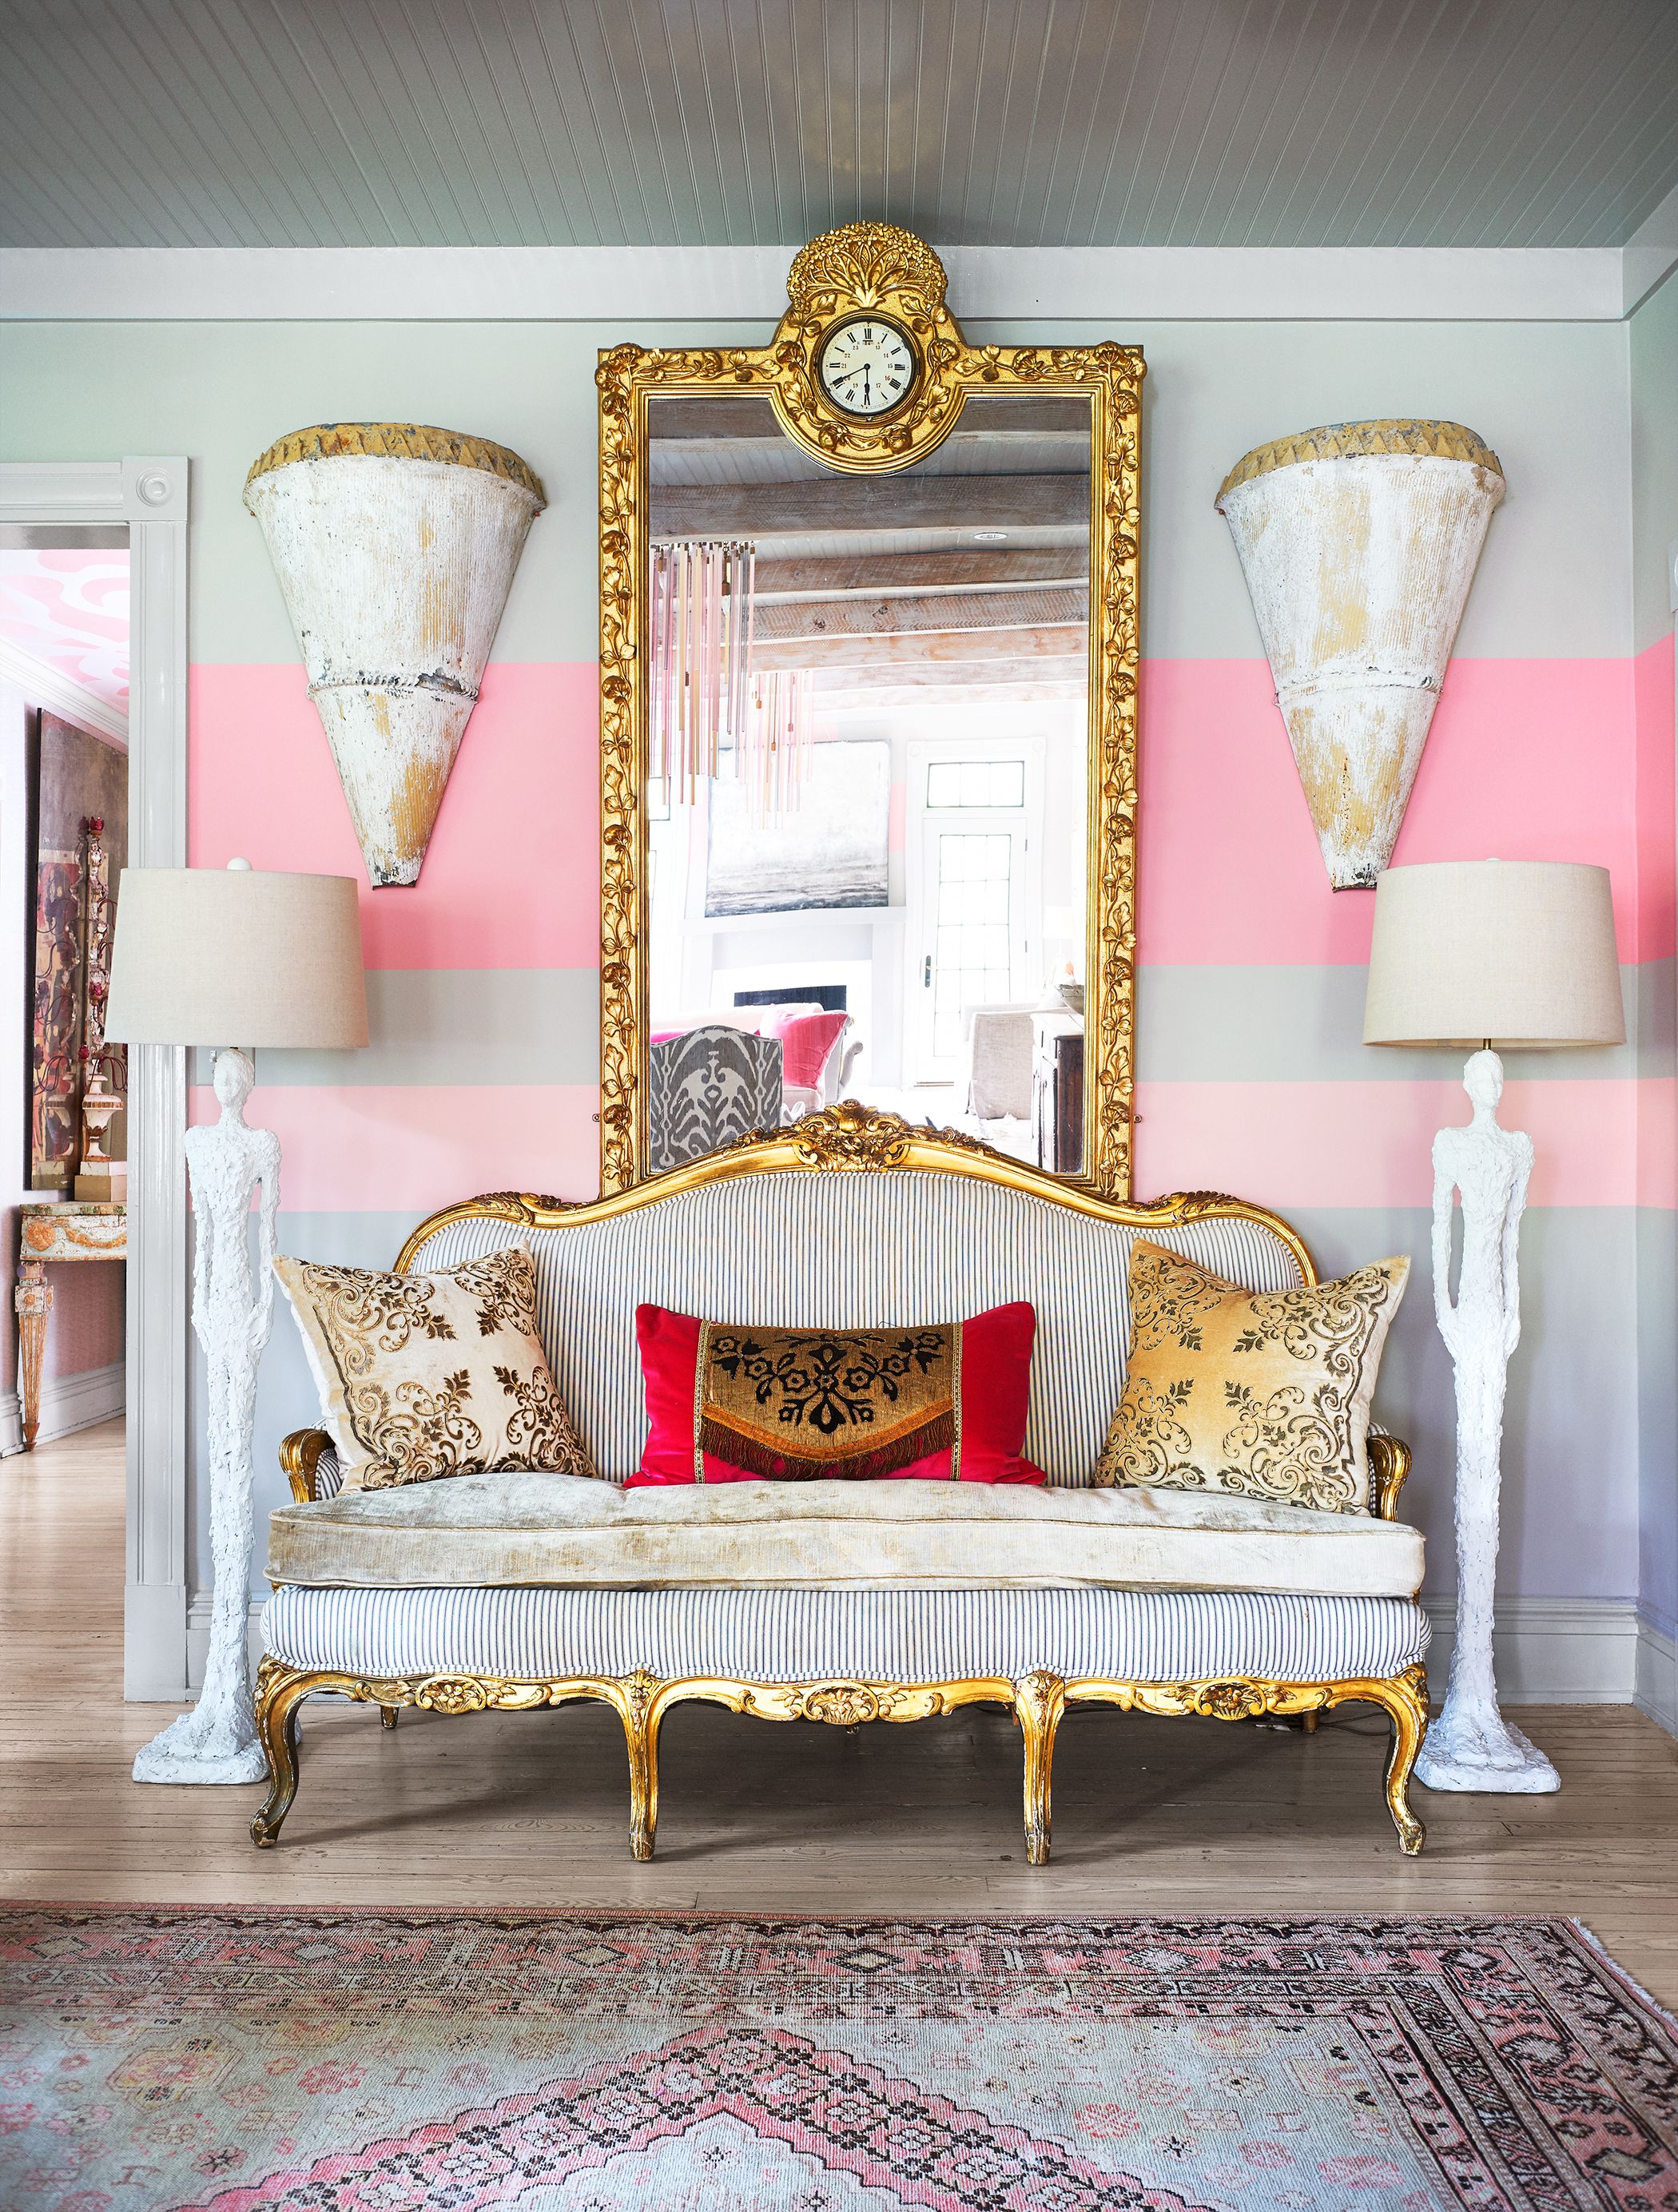 The 5 Best Coral Paint Colors to Add Warmth to Your Home